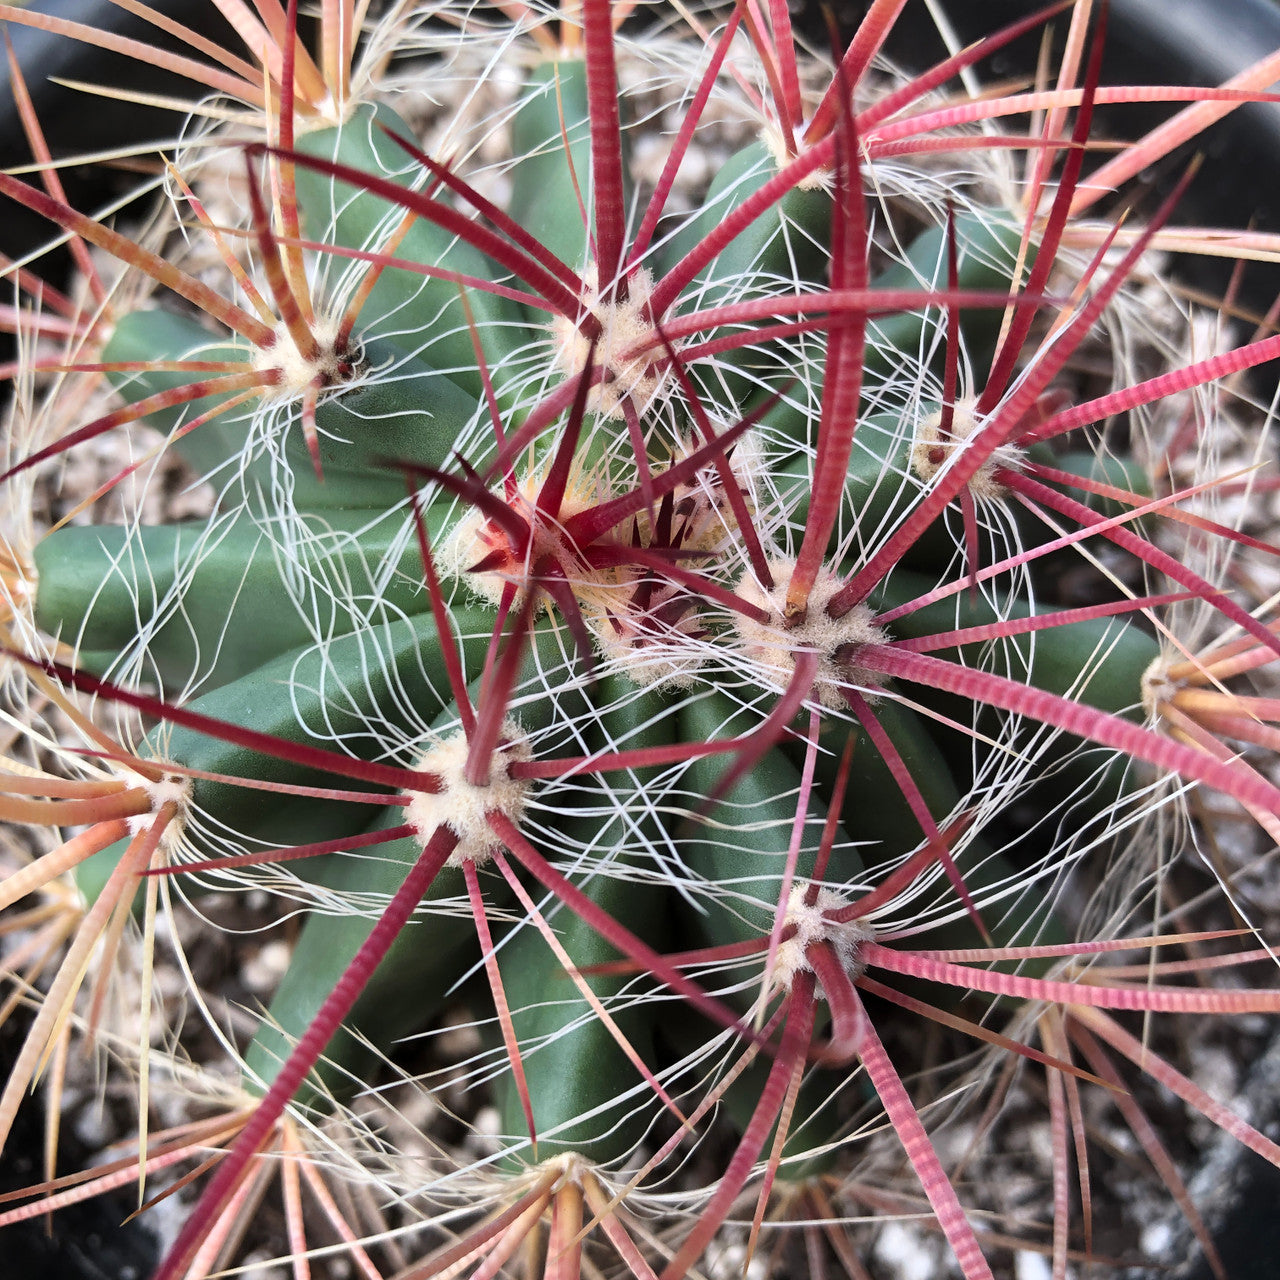 Close-up of a Ferocactus Acanthodes showcasing its distinctive barrel shape and dense arrangement of spines in varying shades of red.